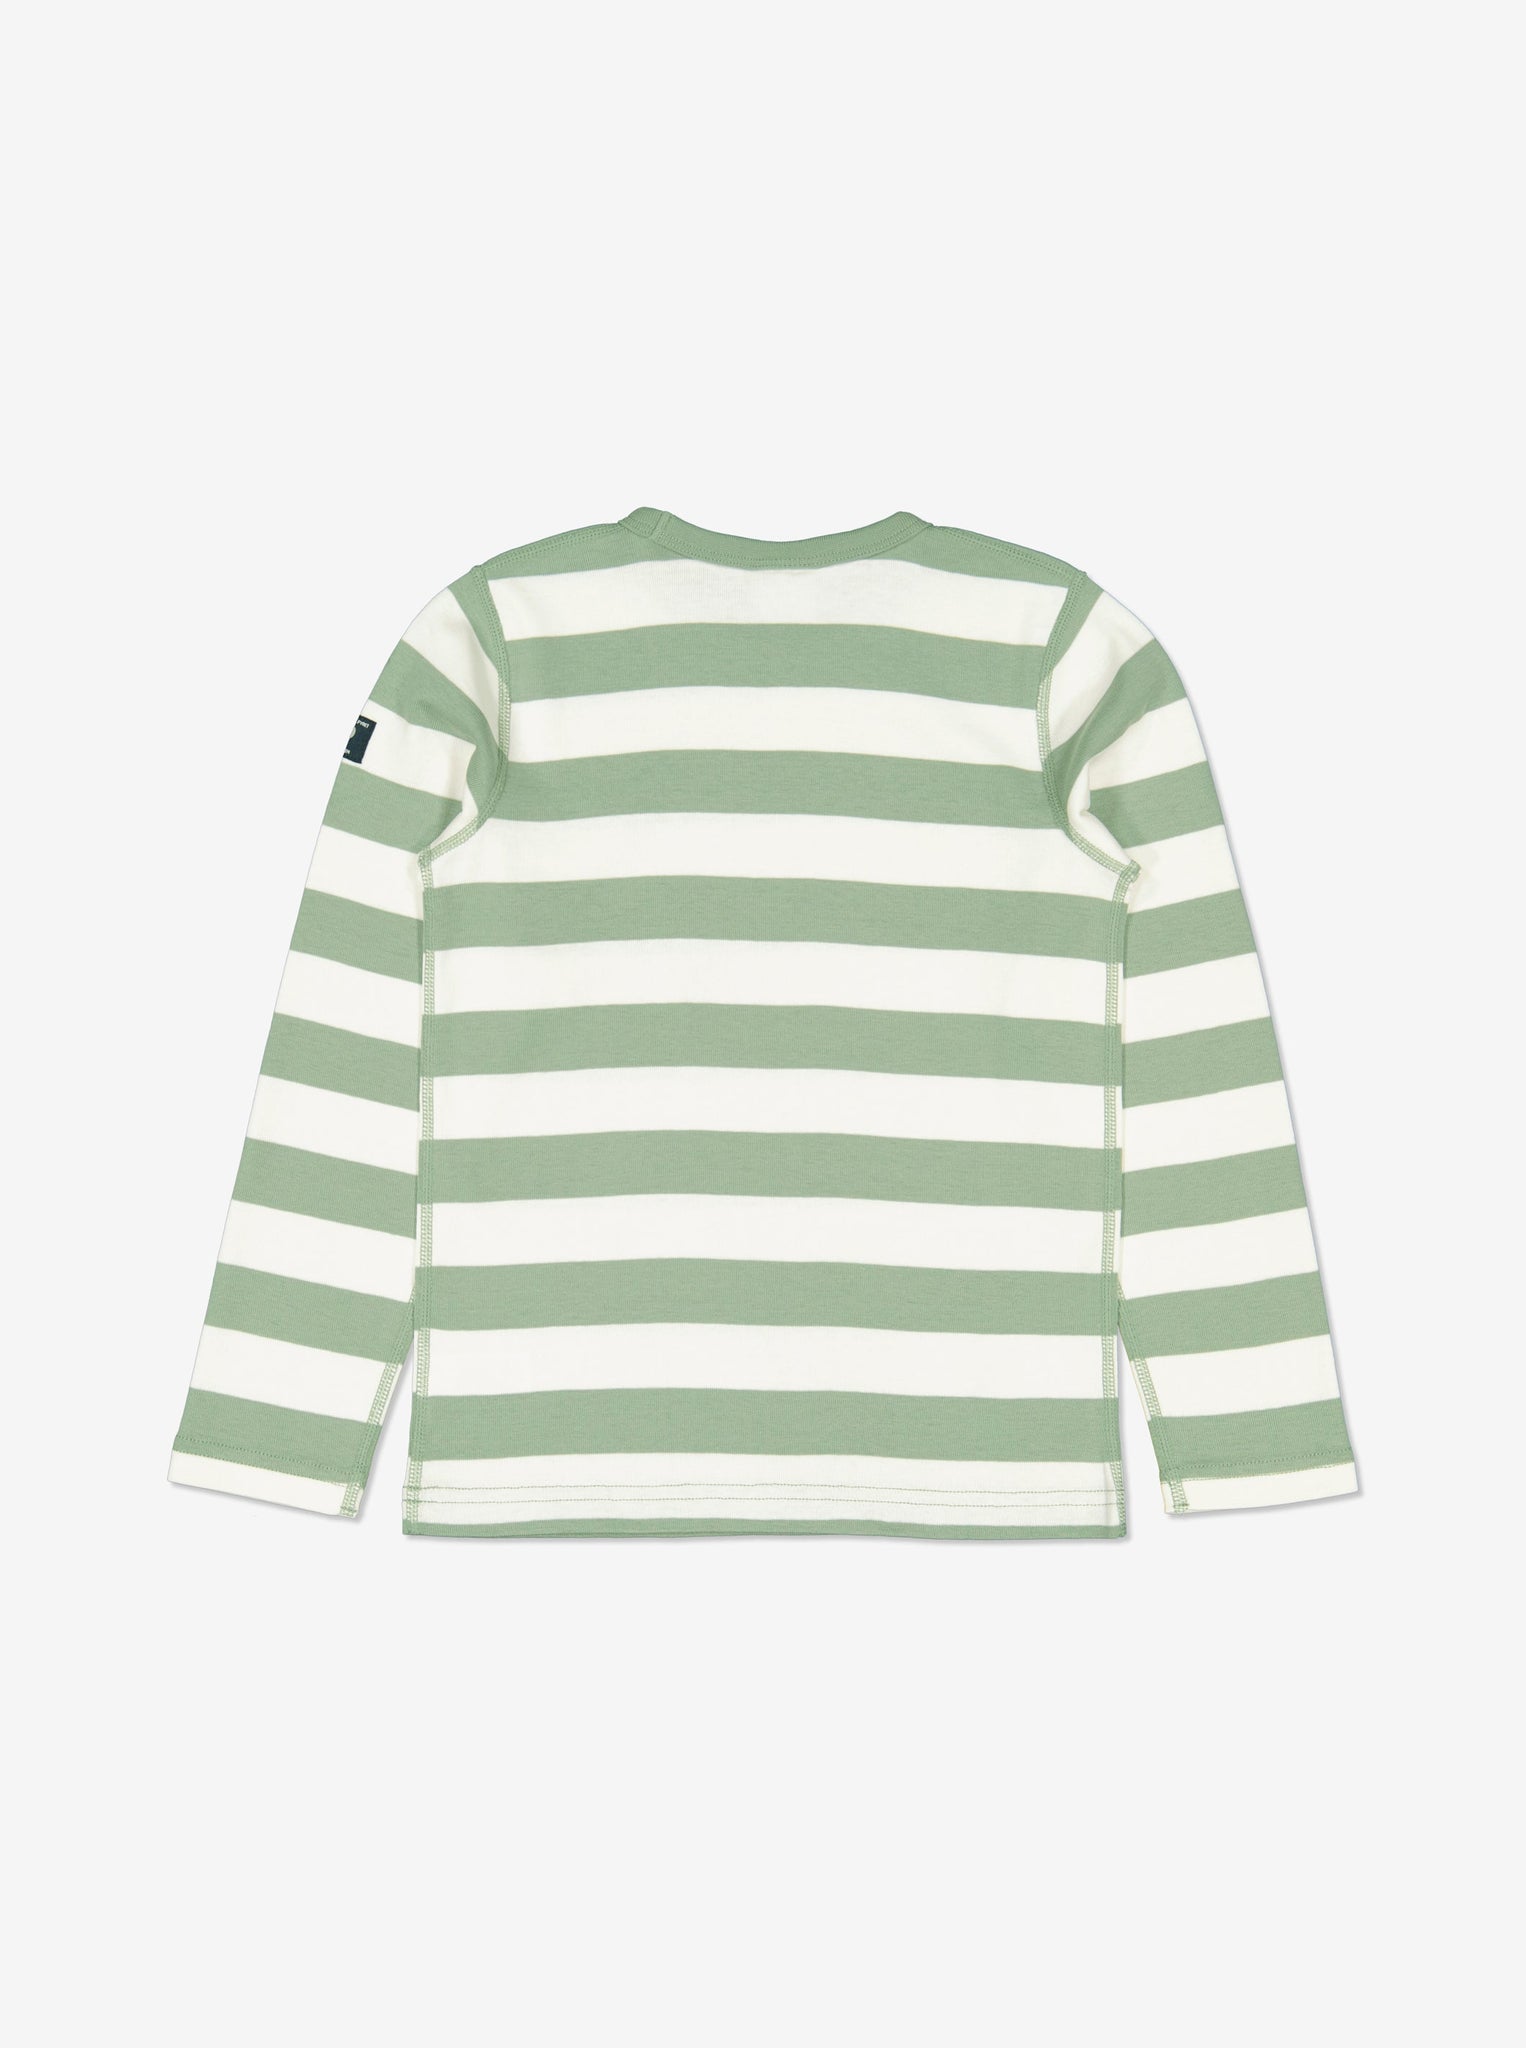  Organic Cotton Green Striped Kids Top from Polarn O. Pyret Kidswear. Made using ethically sourced materials.